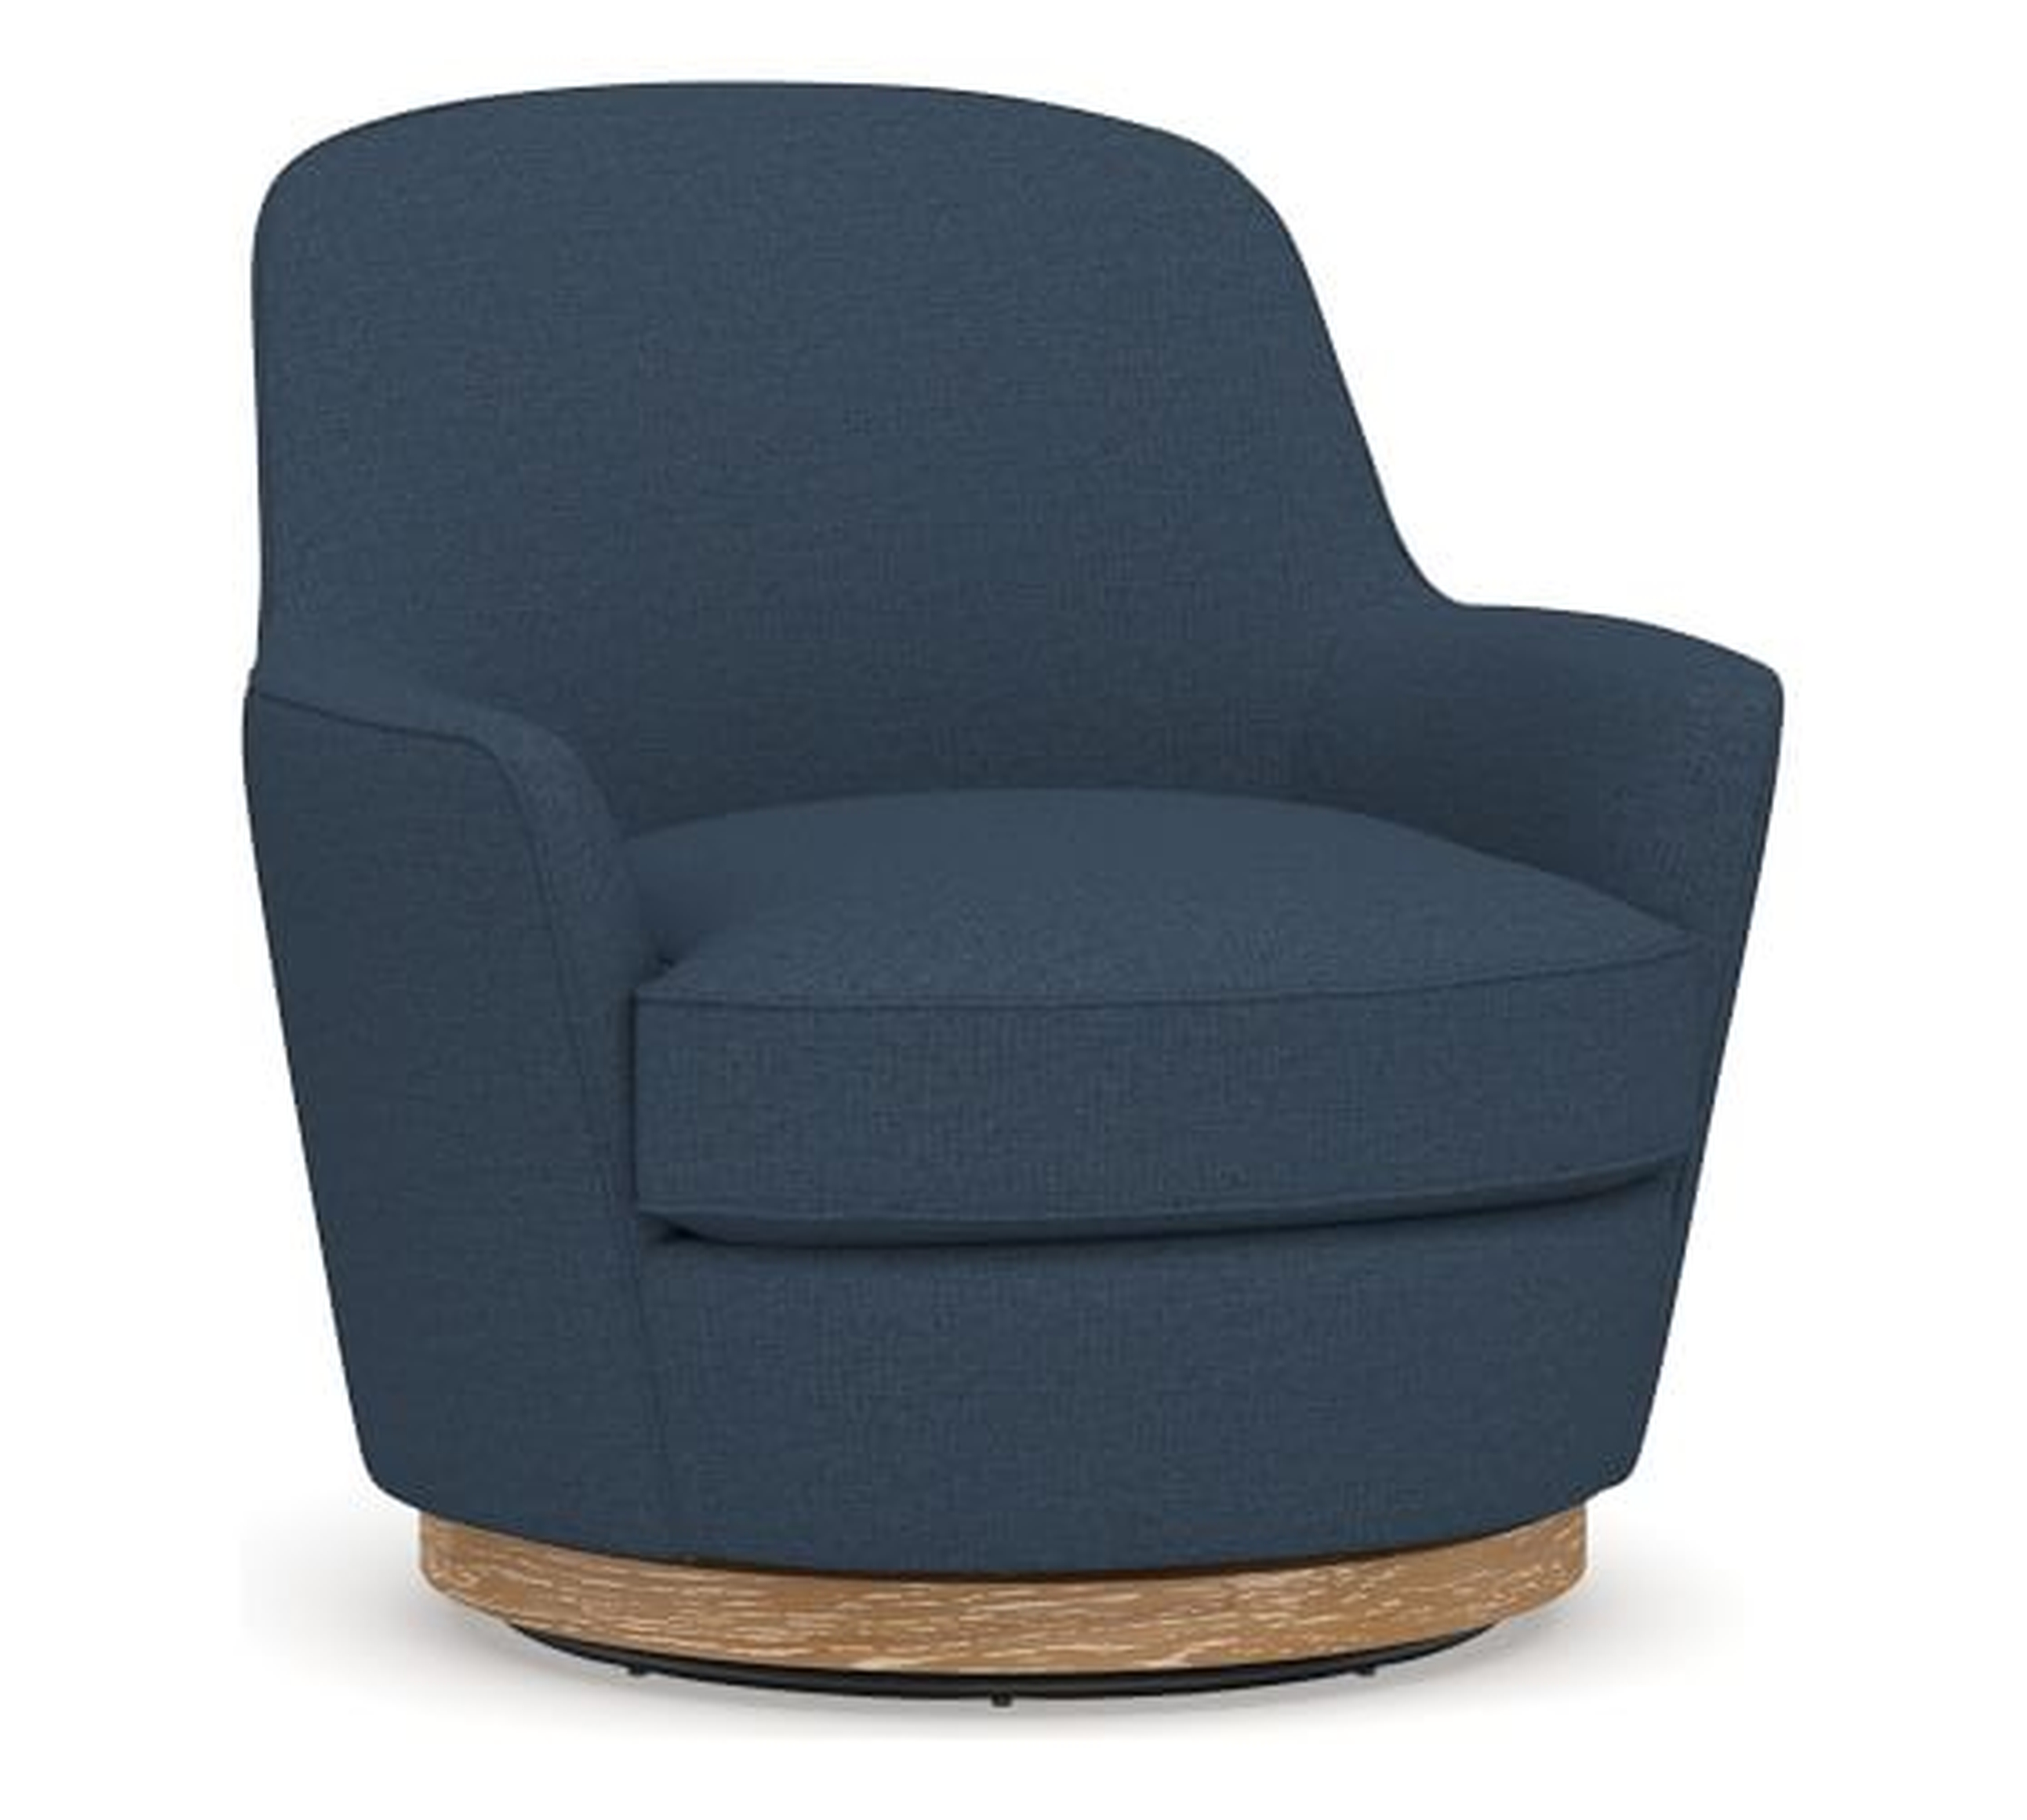 Larkin Upholstered Swivel Armchair, Polyester Wrapped Cushions, Brushed Crossweave Navy - Pottery Barn